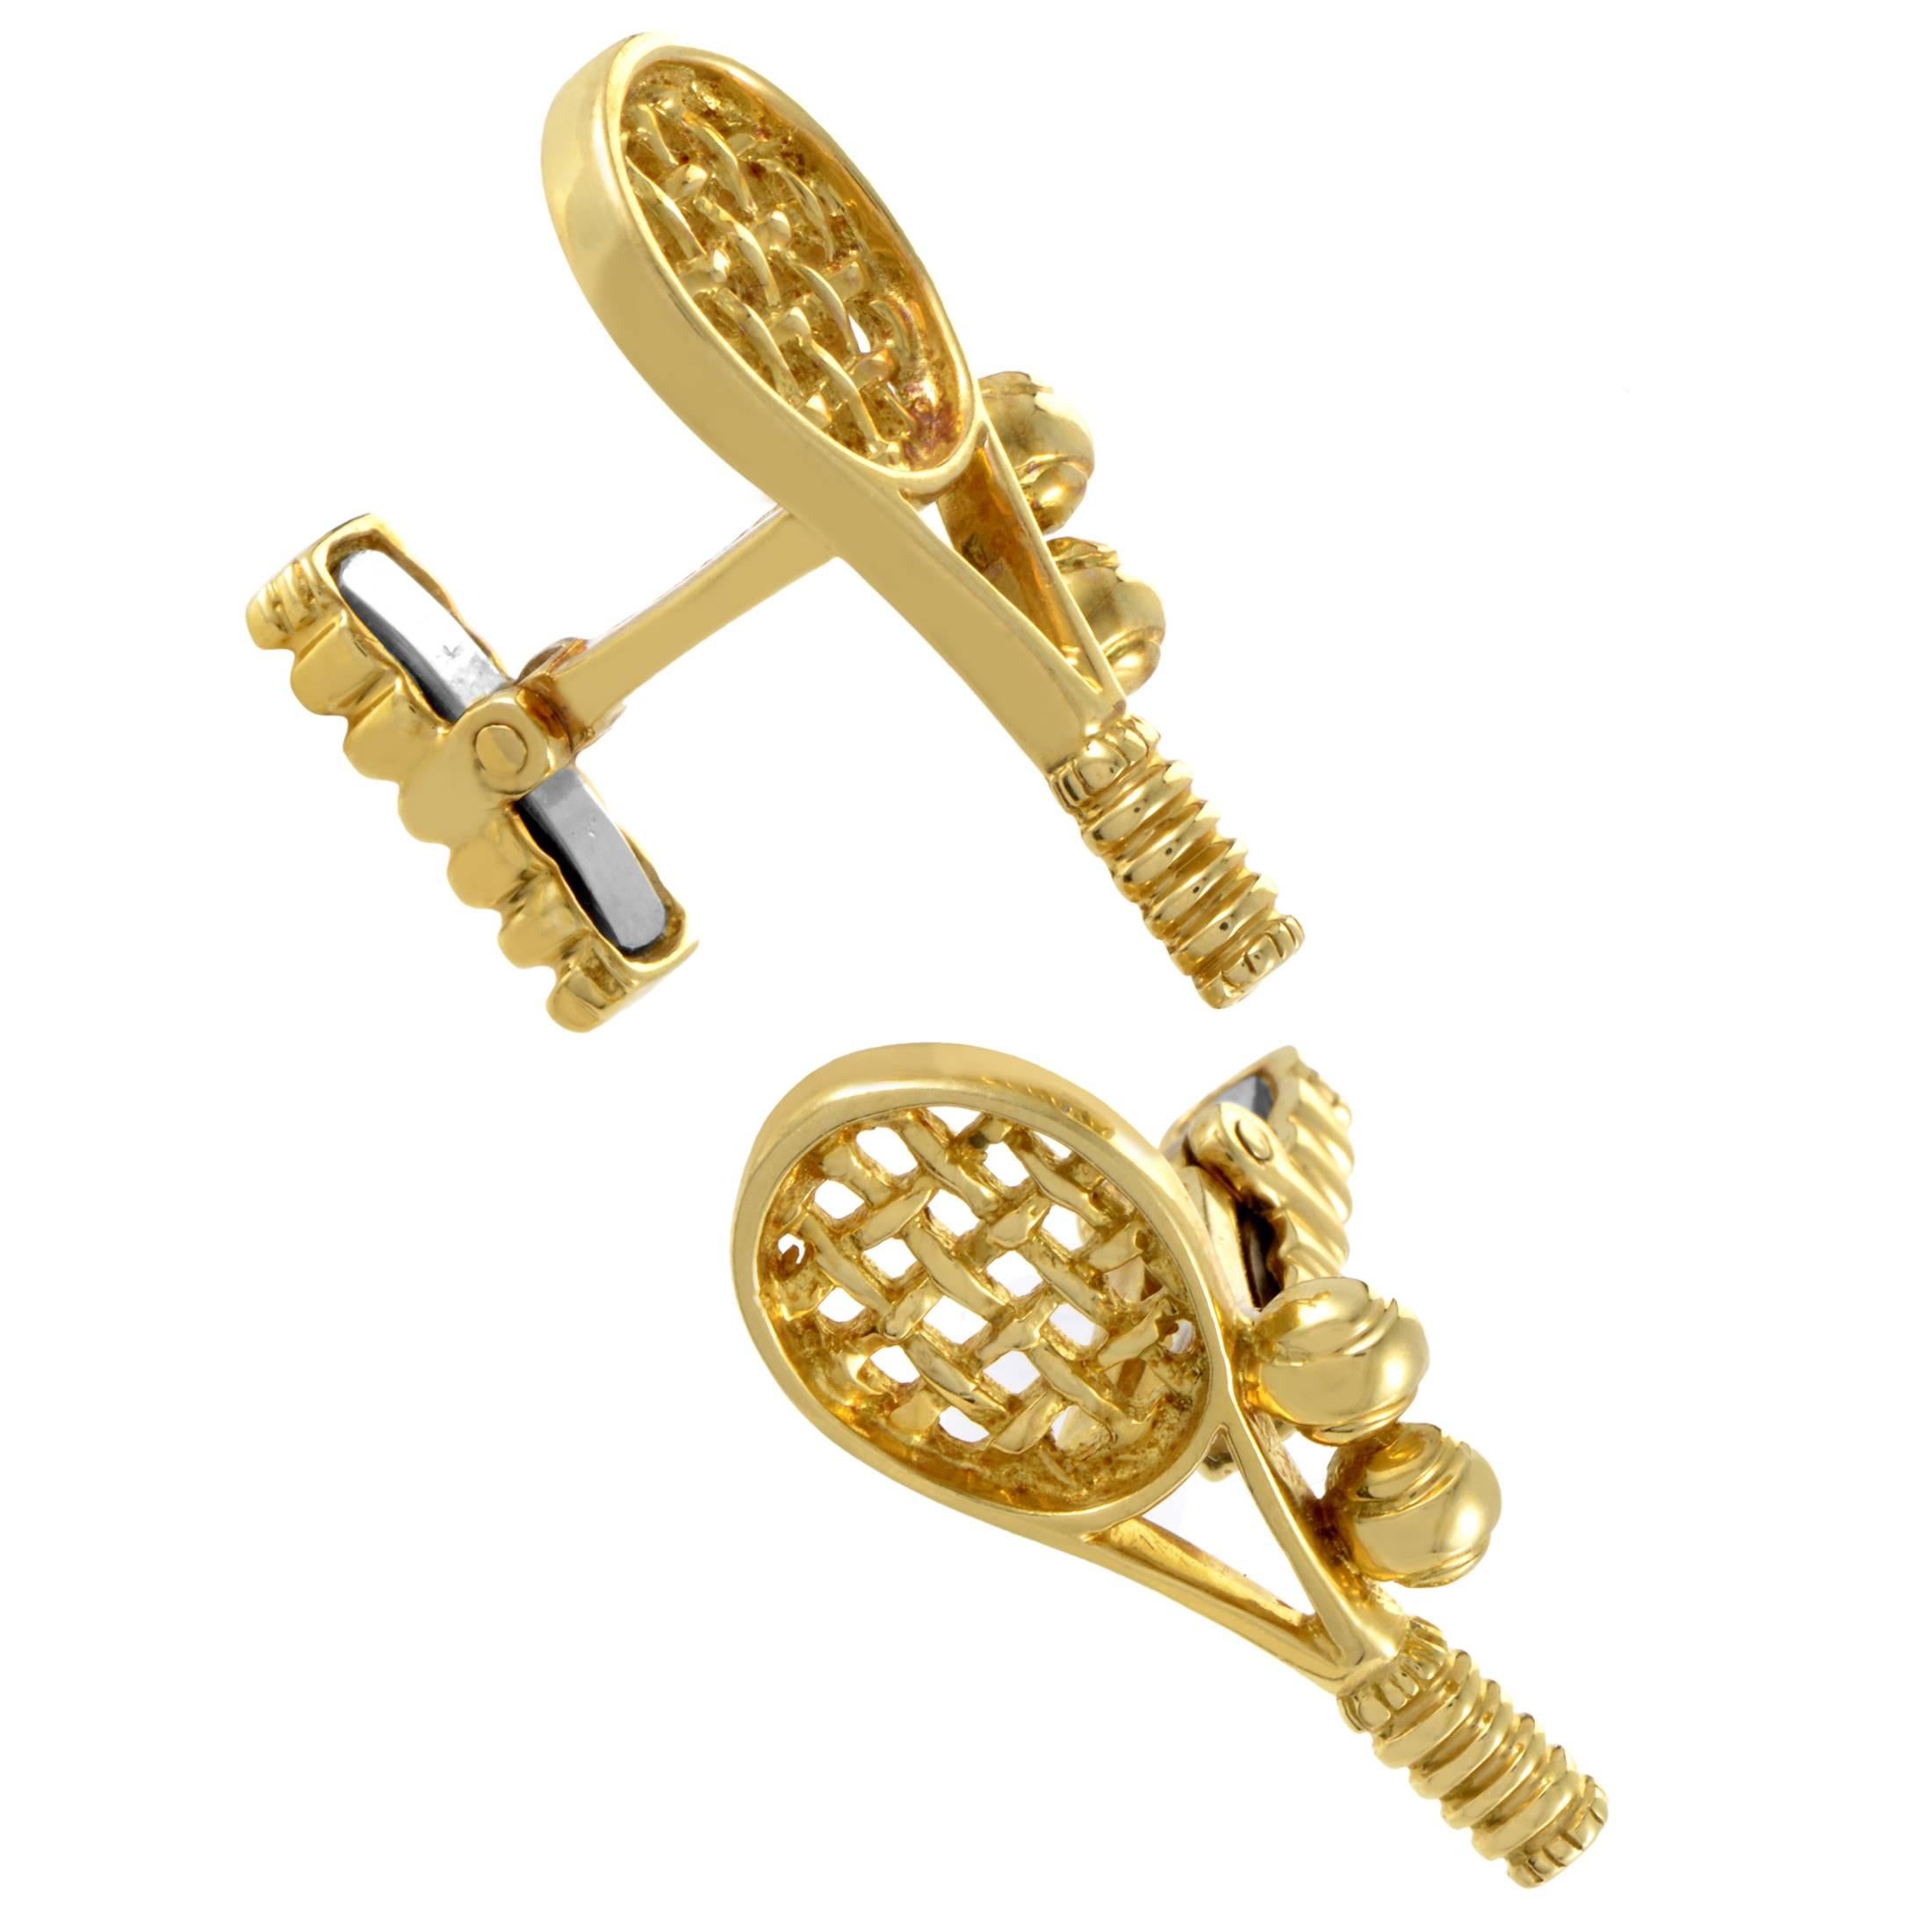 Designed in the intriguing and daring shape of tennis rackets and balls, these neat cufflinks from Tiffany & Co. employ the inherent radiance of luxurious 18K yellow gold to exude a stunning allure.
Included Items: Manufacturer's Pouch